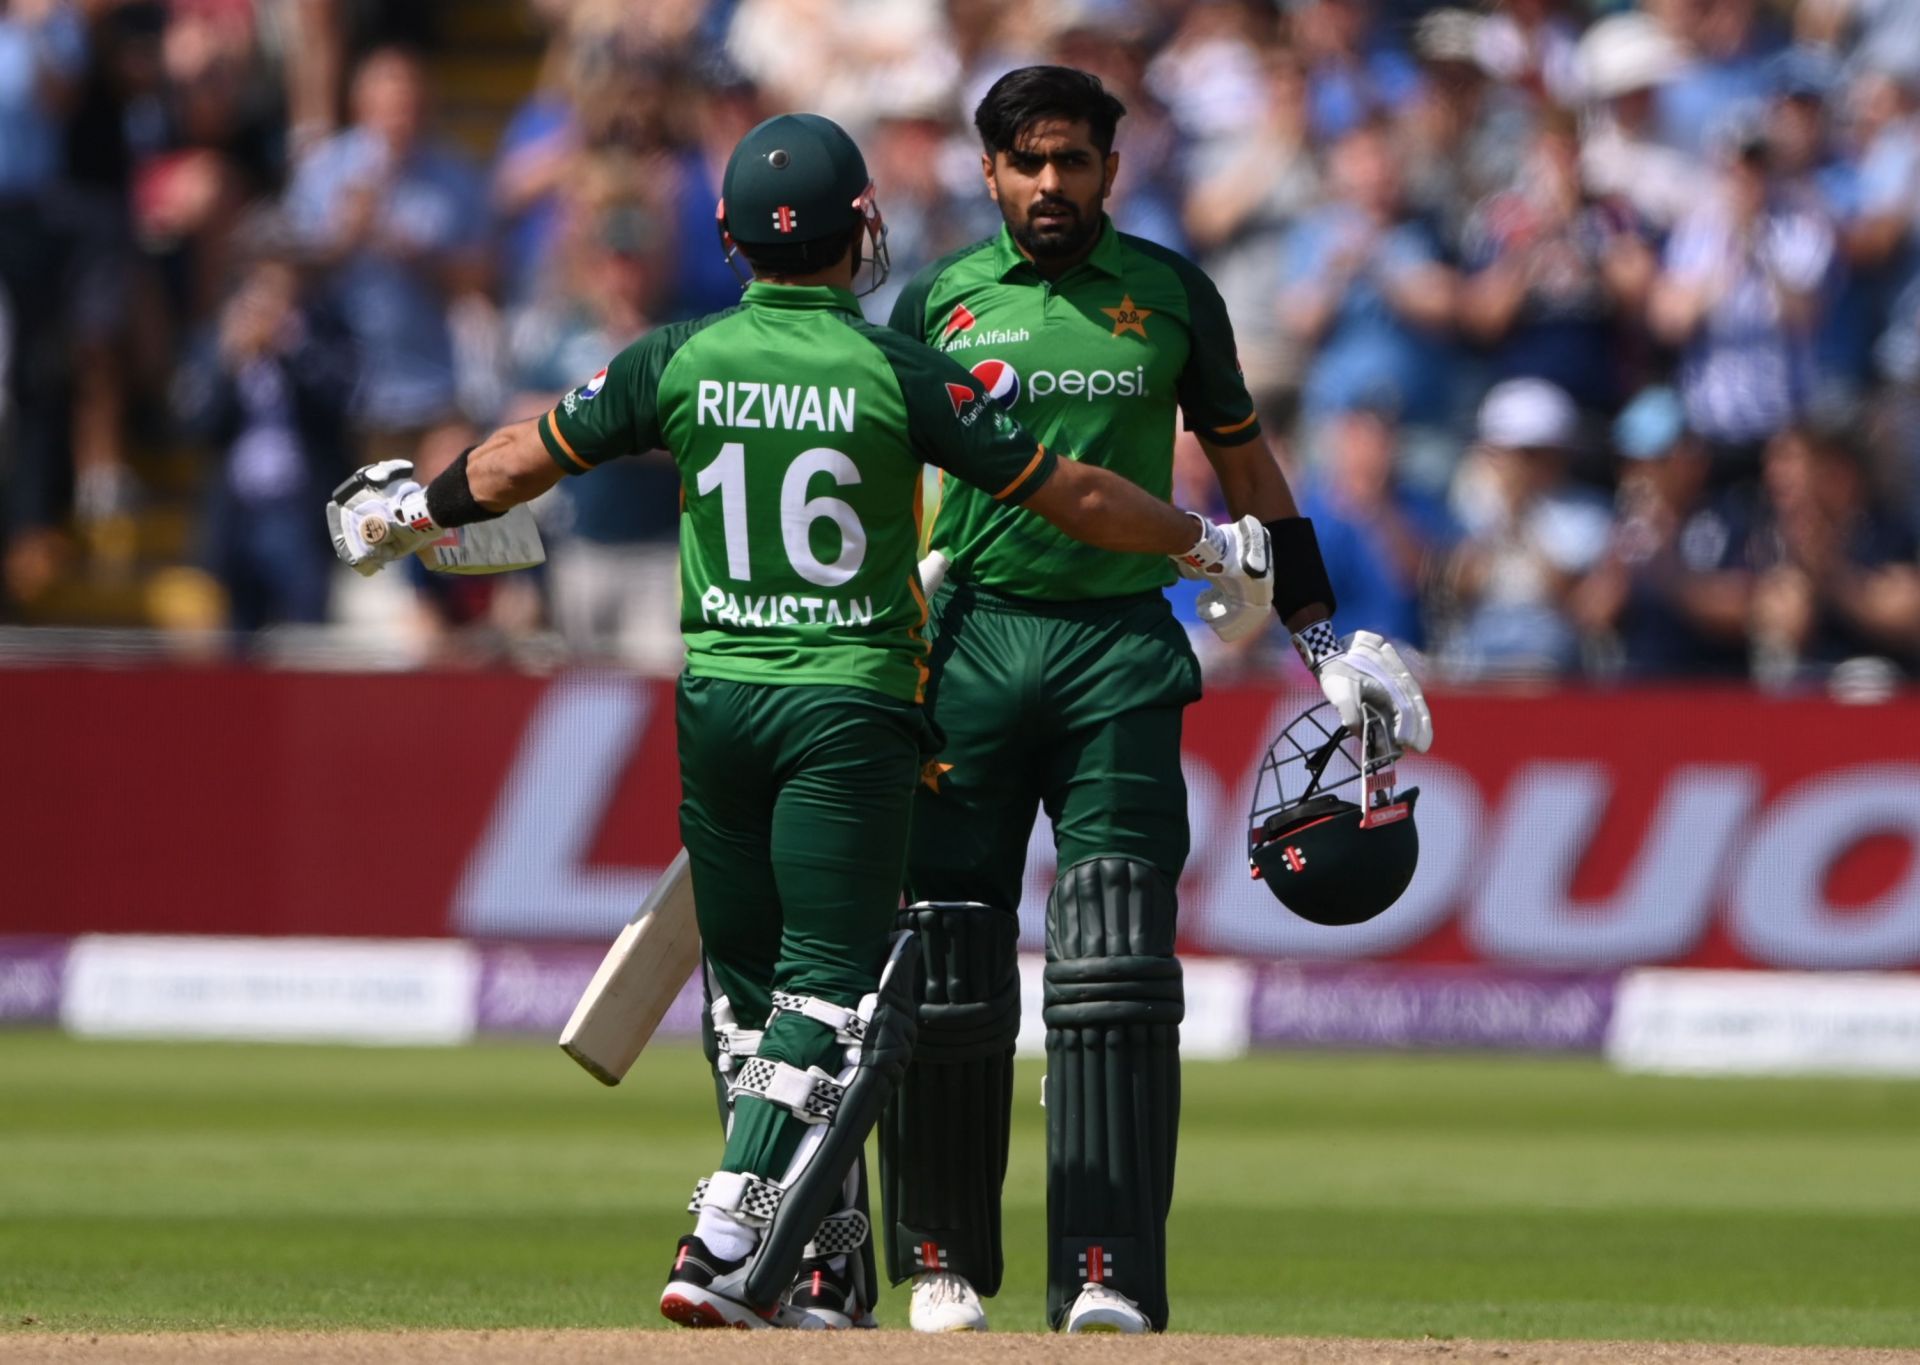 Mohammad Rizwan and Babar Azam. Pic: Getty Images